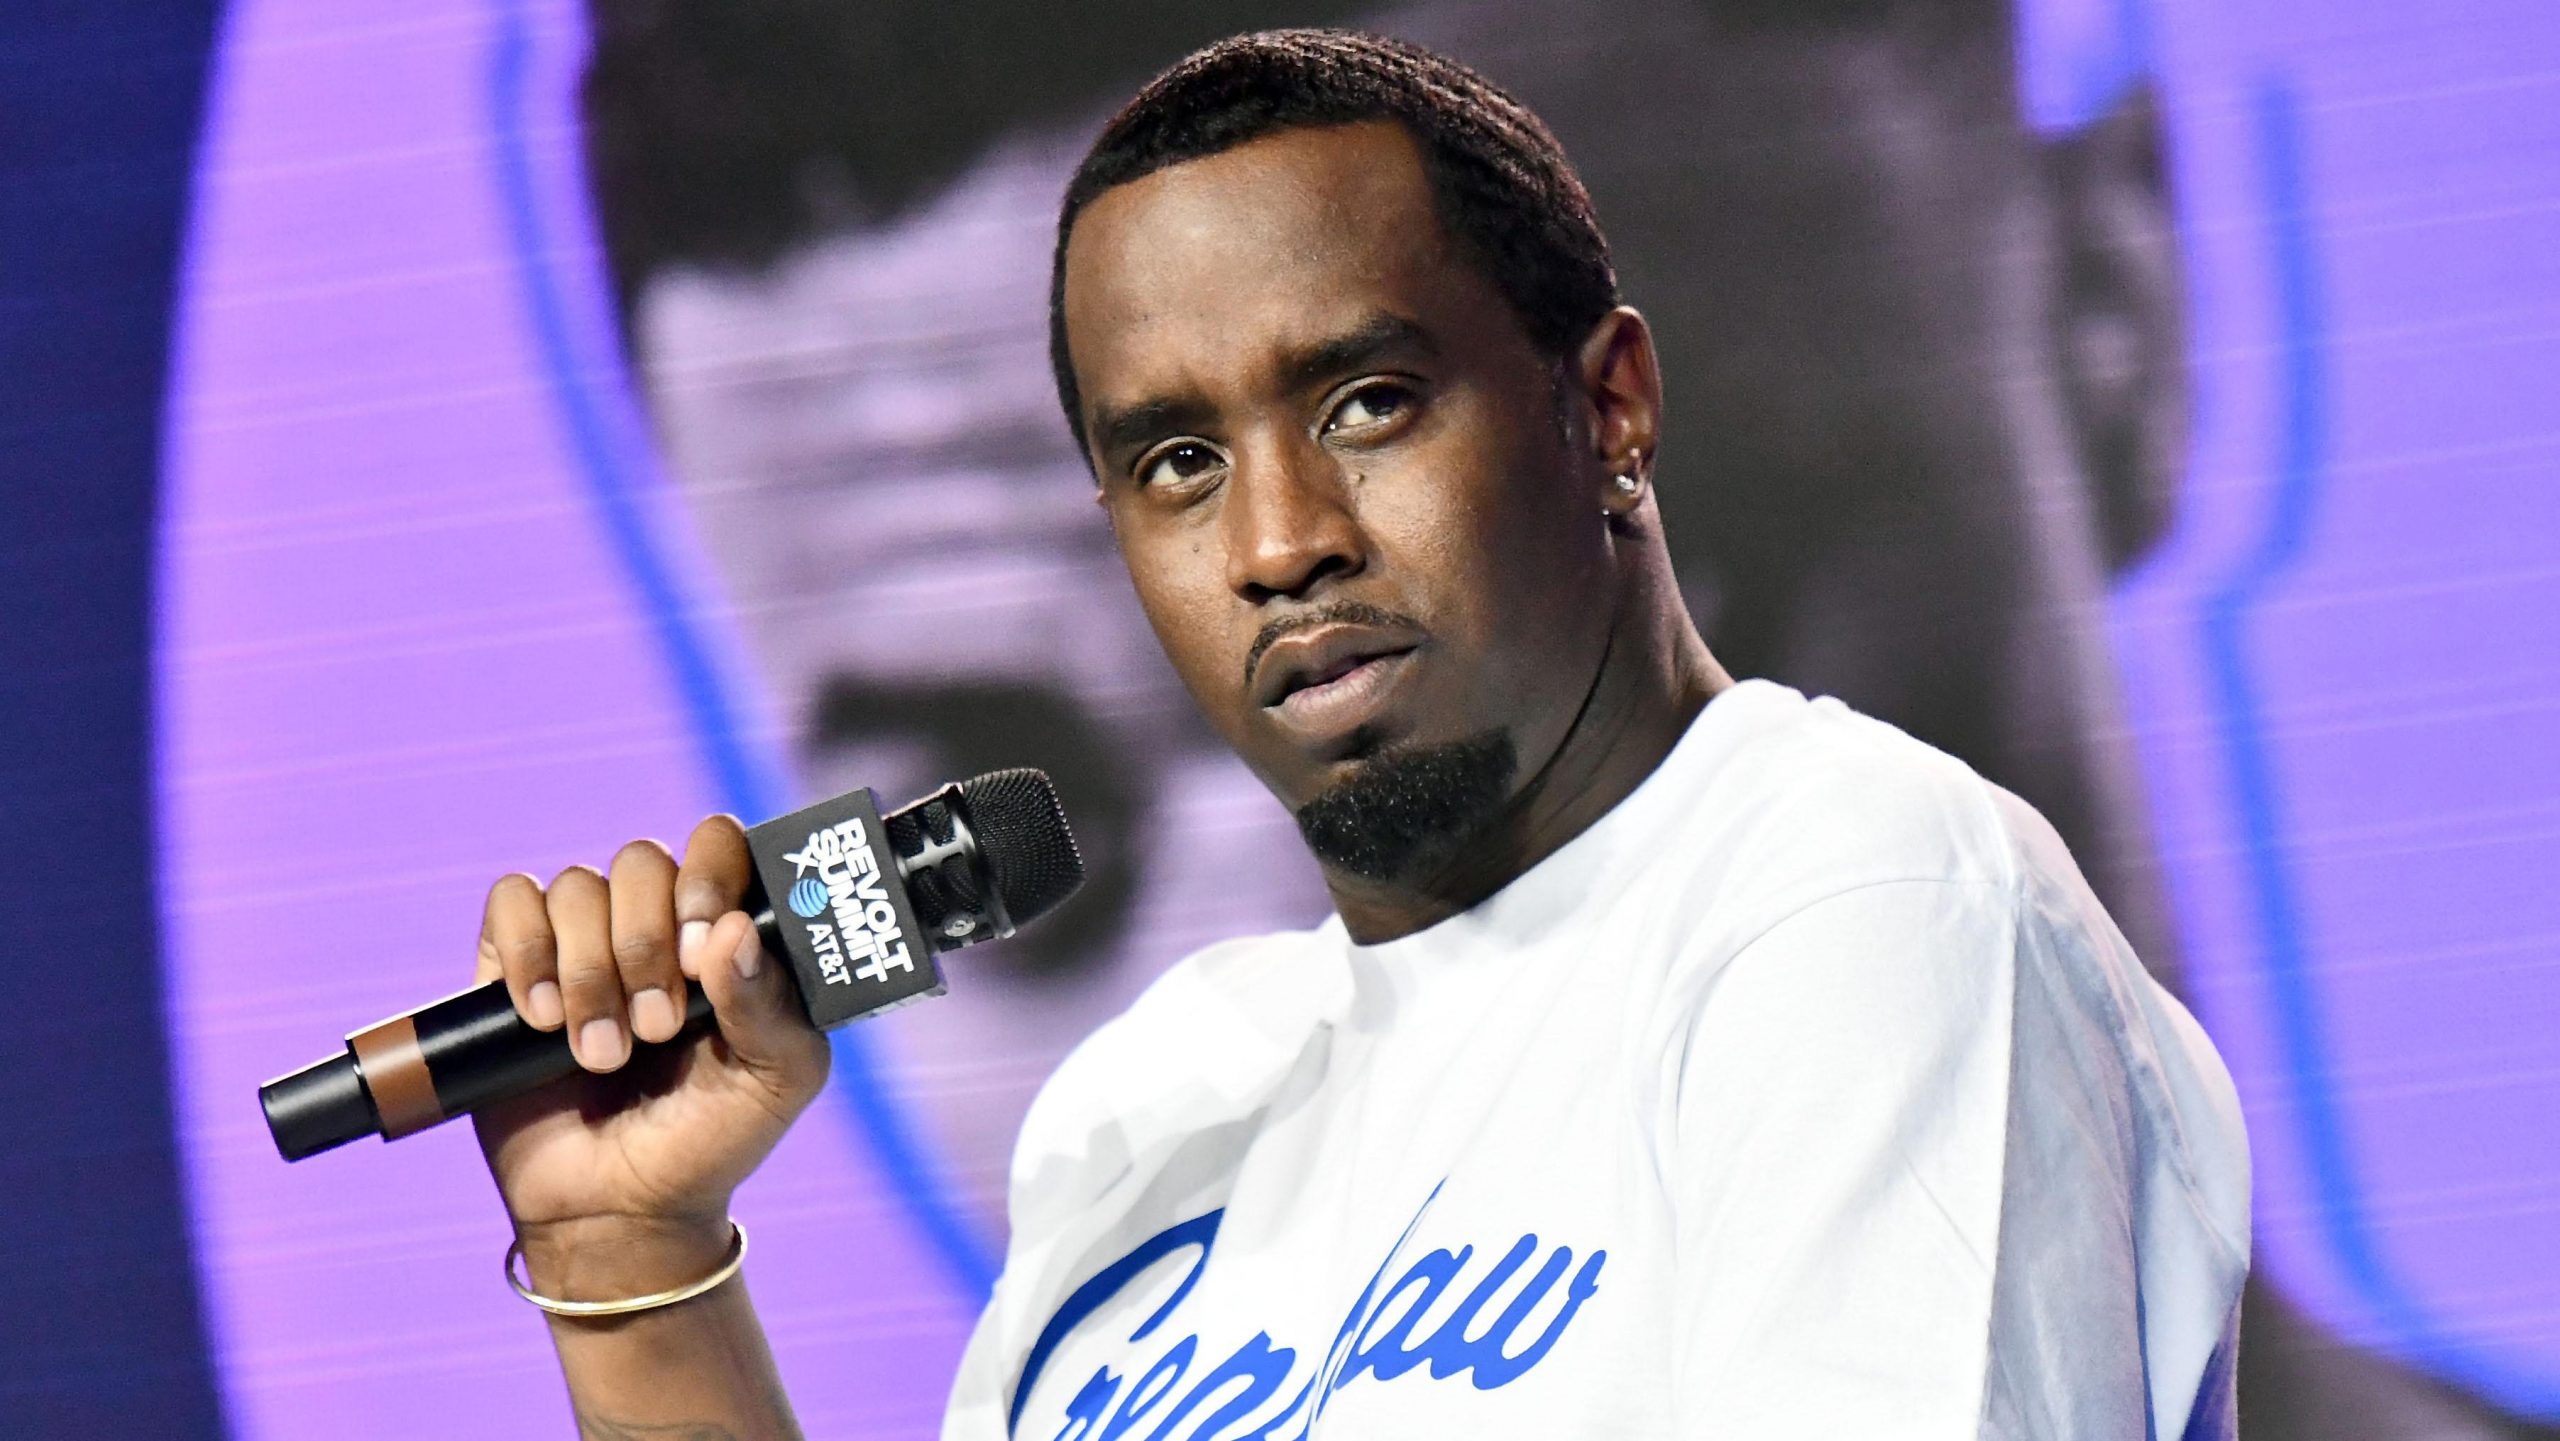 Sean “Diddy” Combs starts new record label called ‘Love Records’